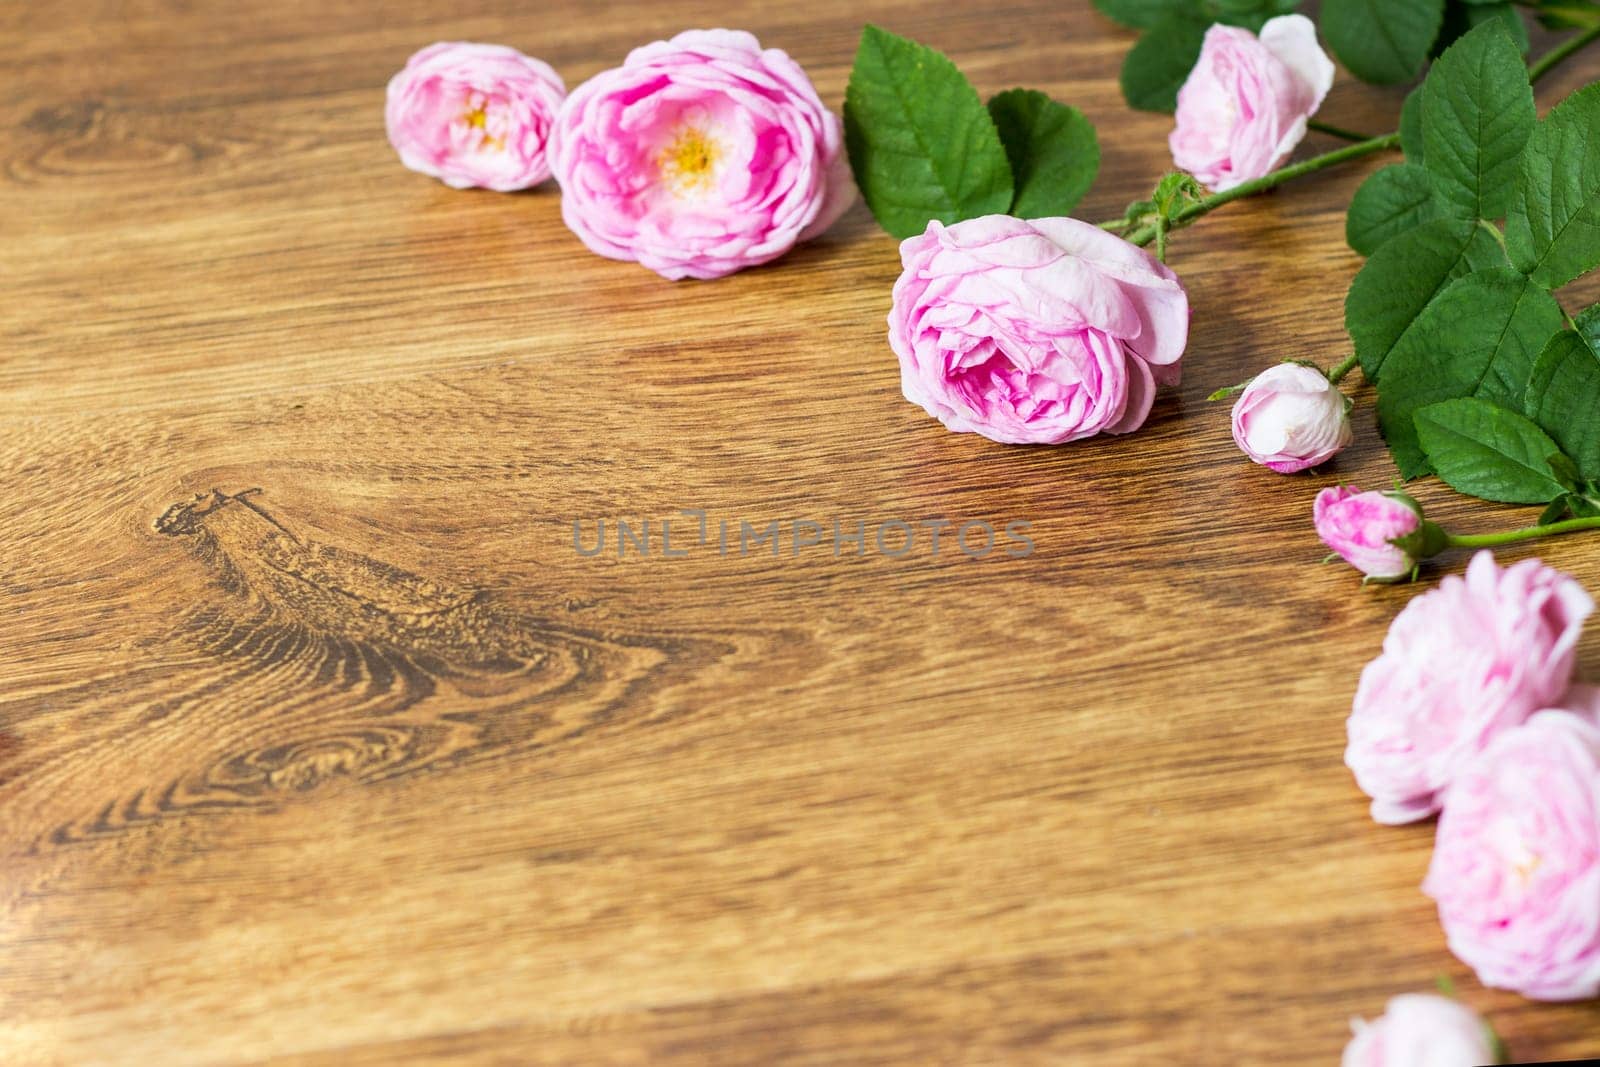 Flower tea rose buds on old wooden table by Snegok1967